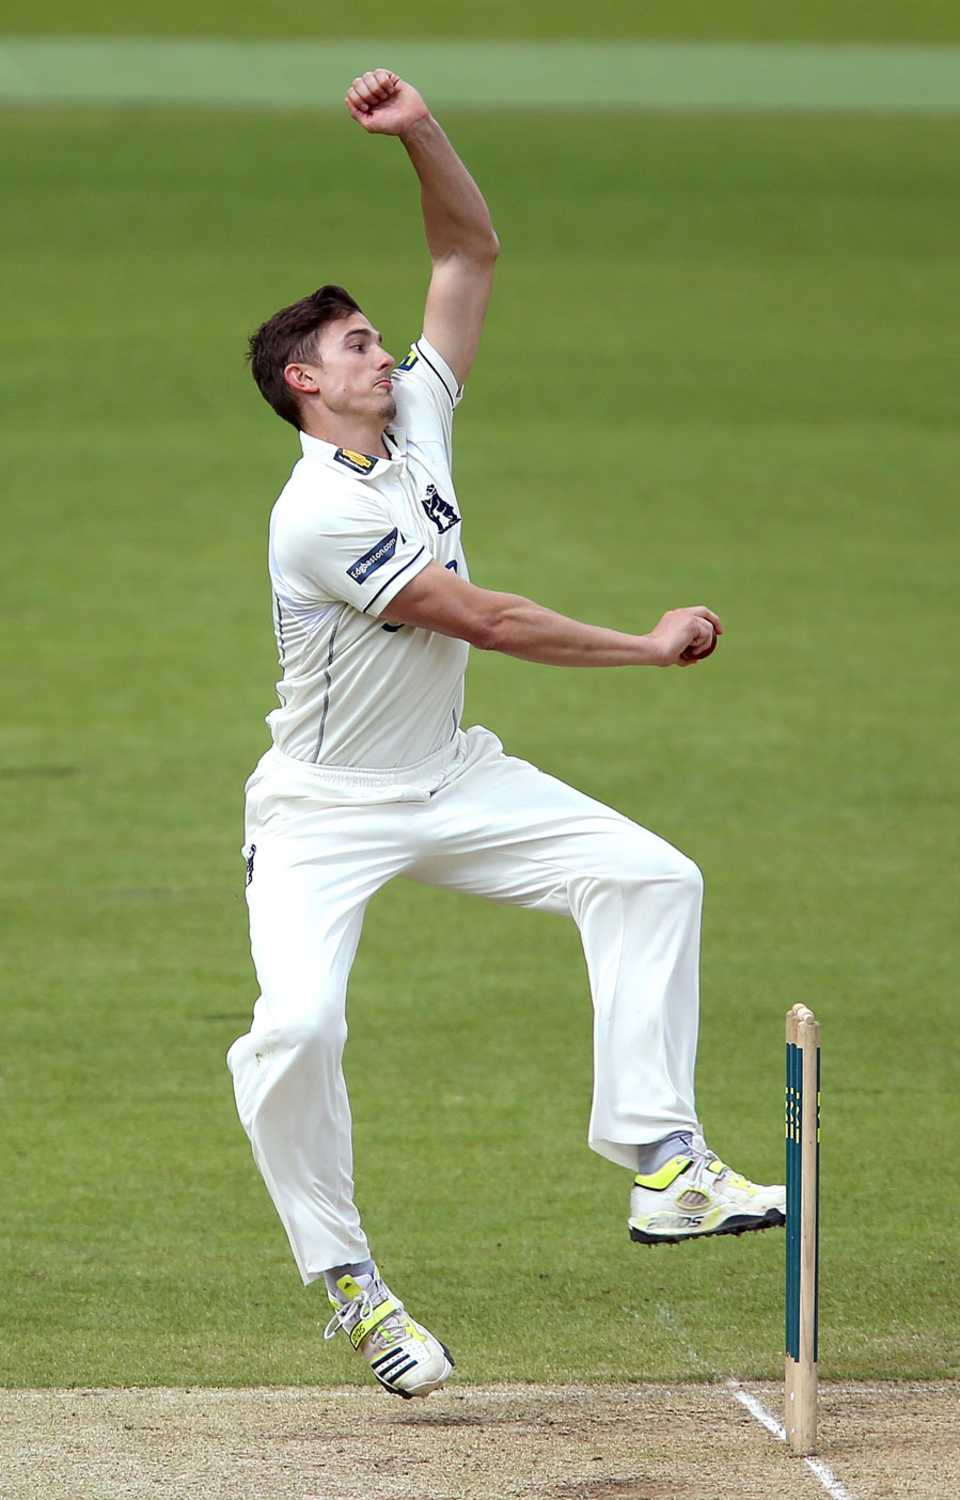 Richard Jones took five wickets on his first appearance for Warwickshire in the Championship